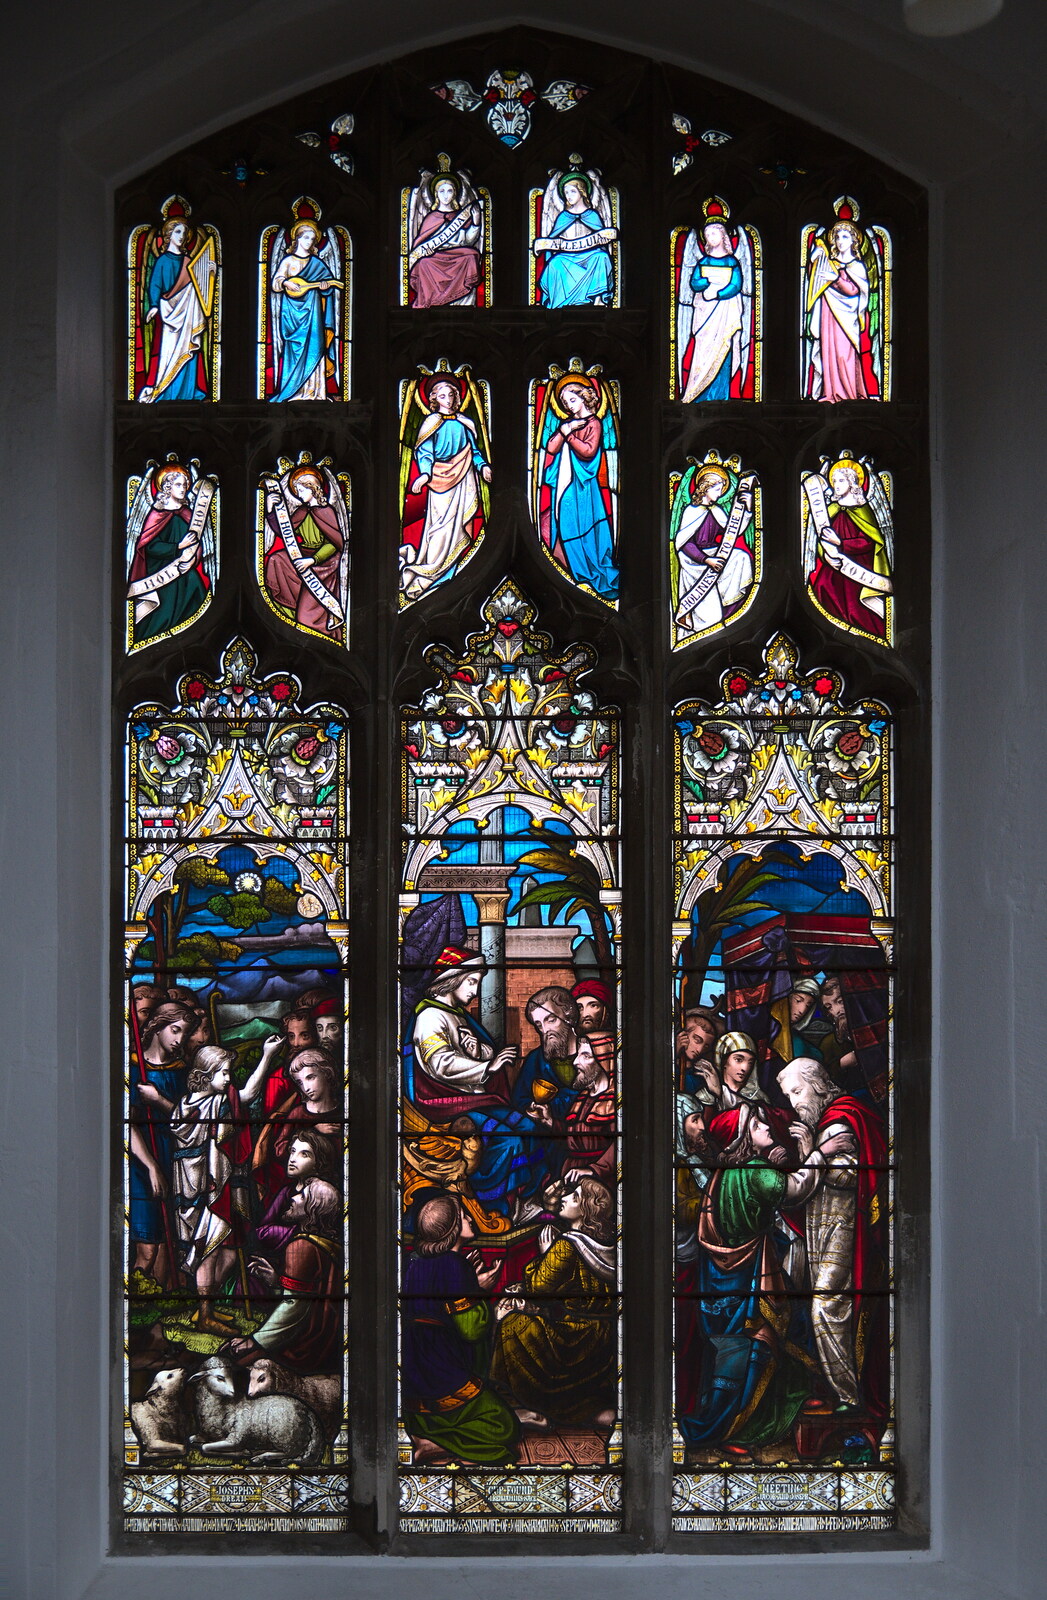 Another nice stained-glass window in St. Mary's from The Lost Pubs of Diss, Norfolk - 26th April 2023